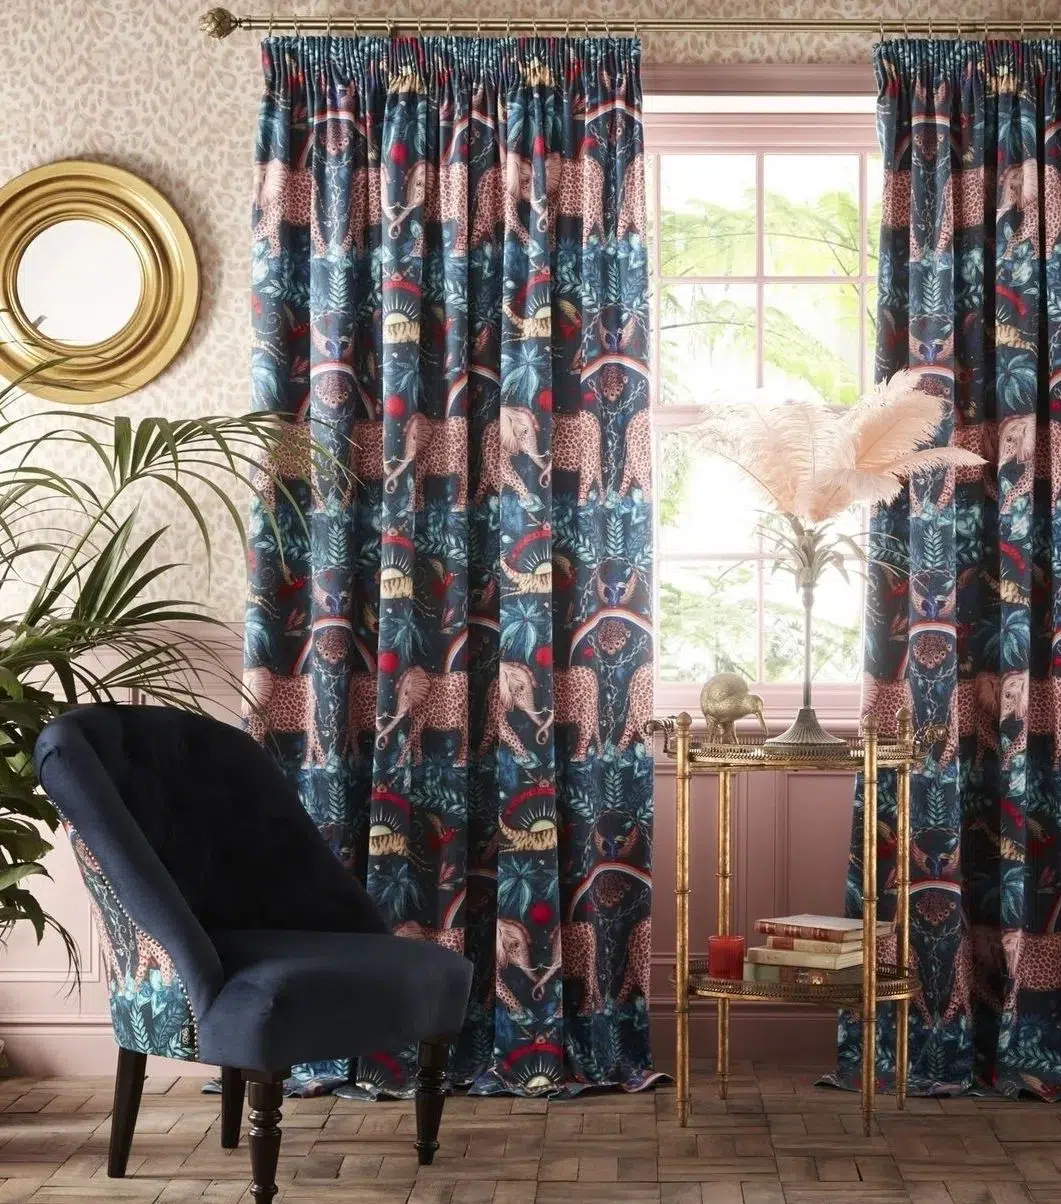 Adorn your space with the
luxurious Zambezi velvet fabric curtains by @emmajshipley and @clarke_clarke_interiors

These curtains create an enchanting feel
for any interior scheme. Explore a captivating realm of curiosity and fantasy
unlike any other. 

For details contact fabrics@stillorgandecor.ie